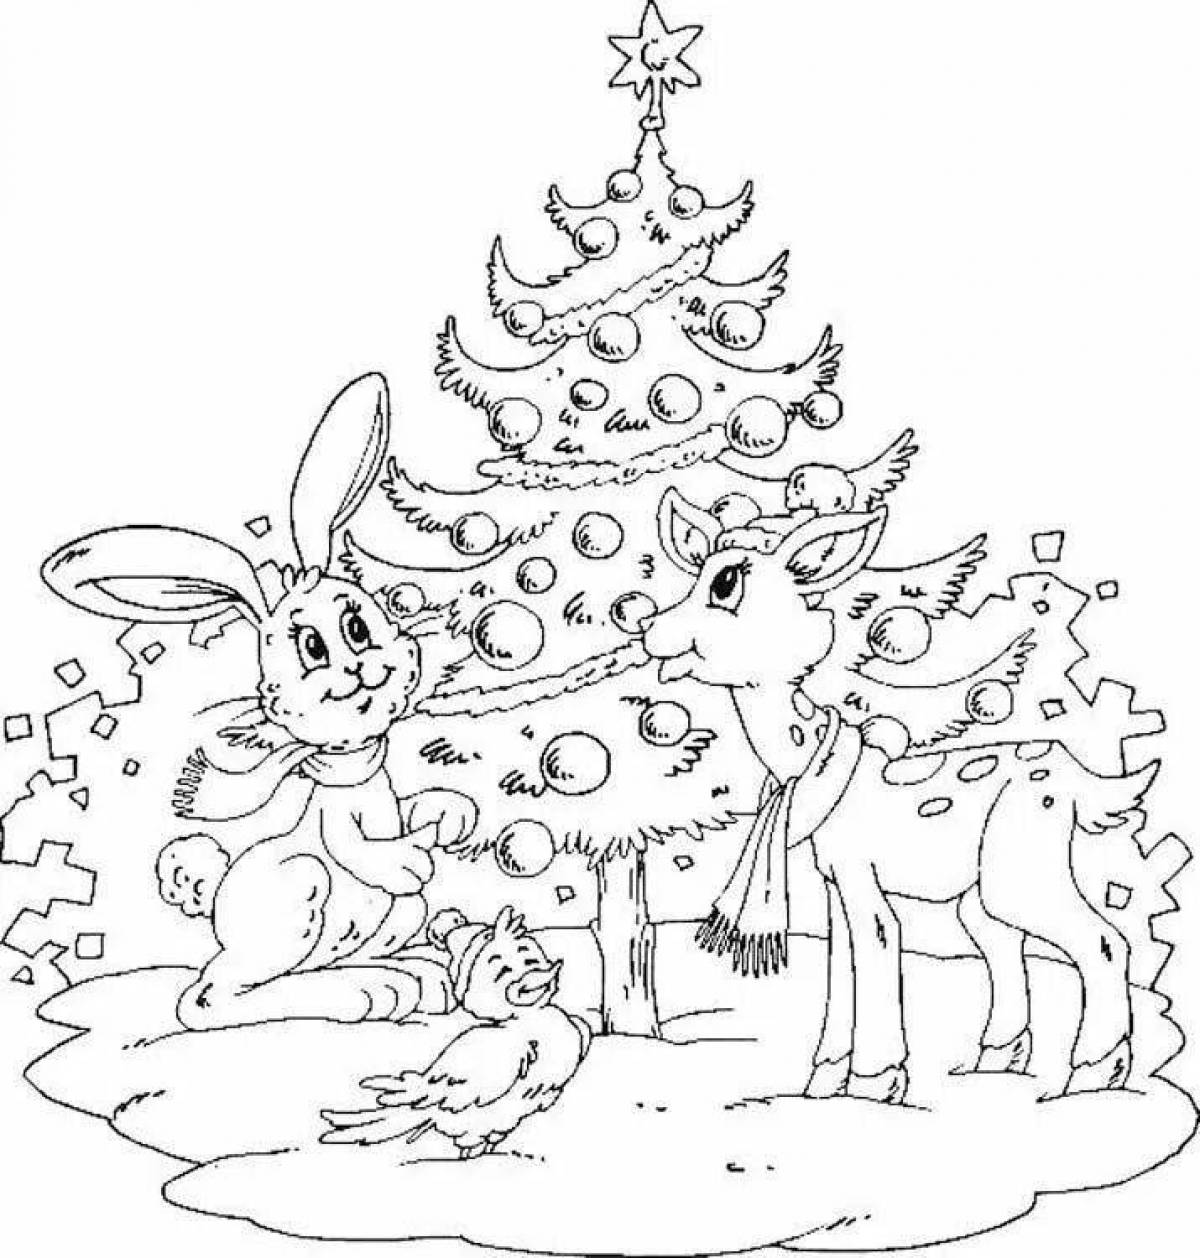 Large Christmas coloring book